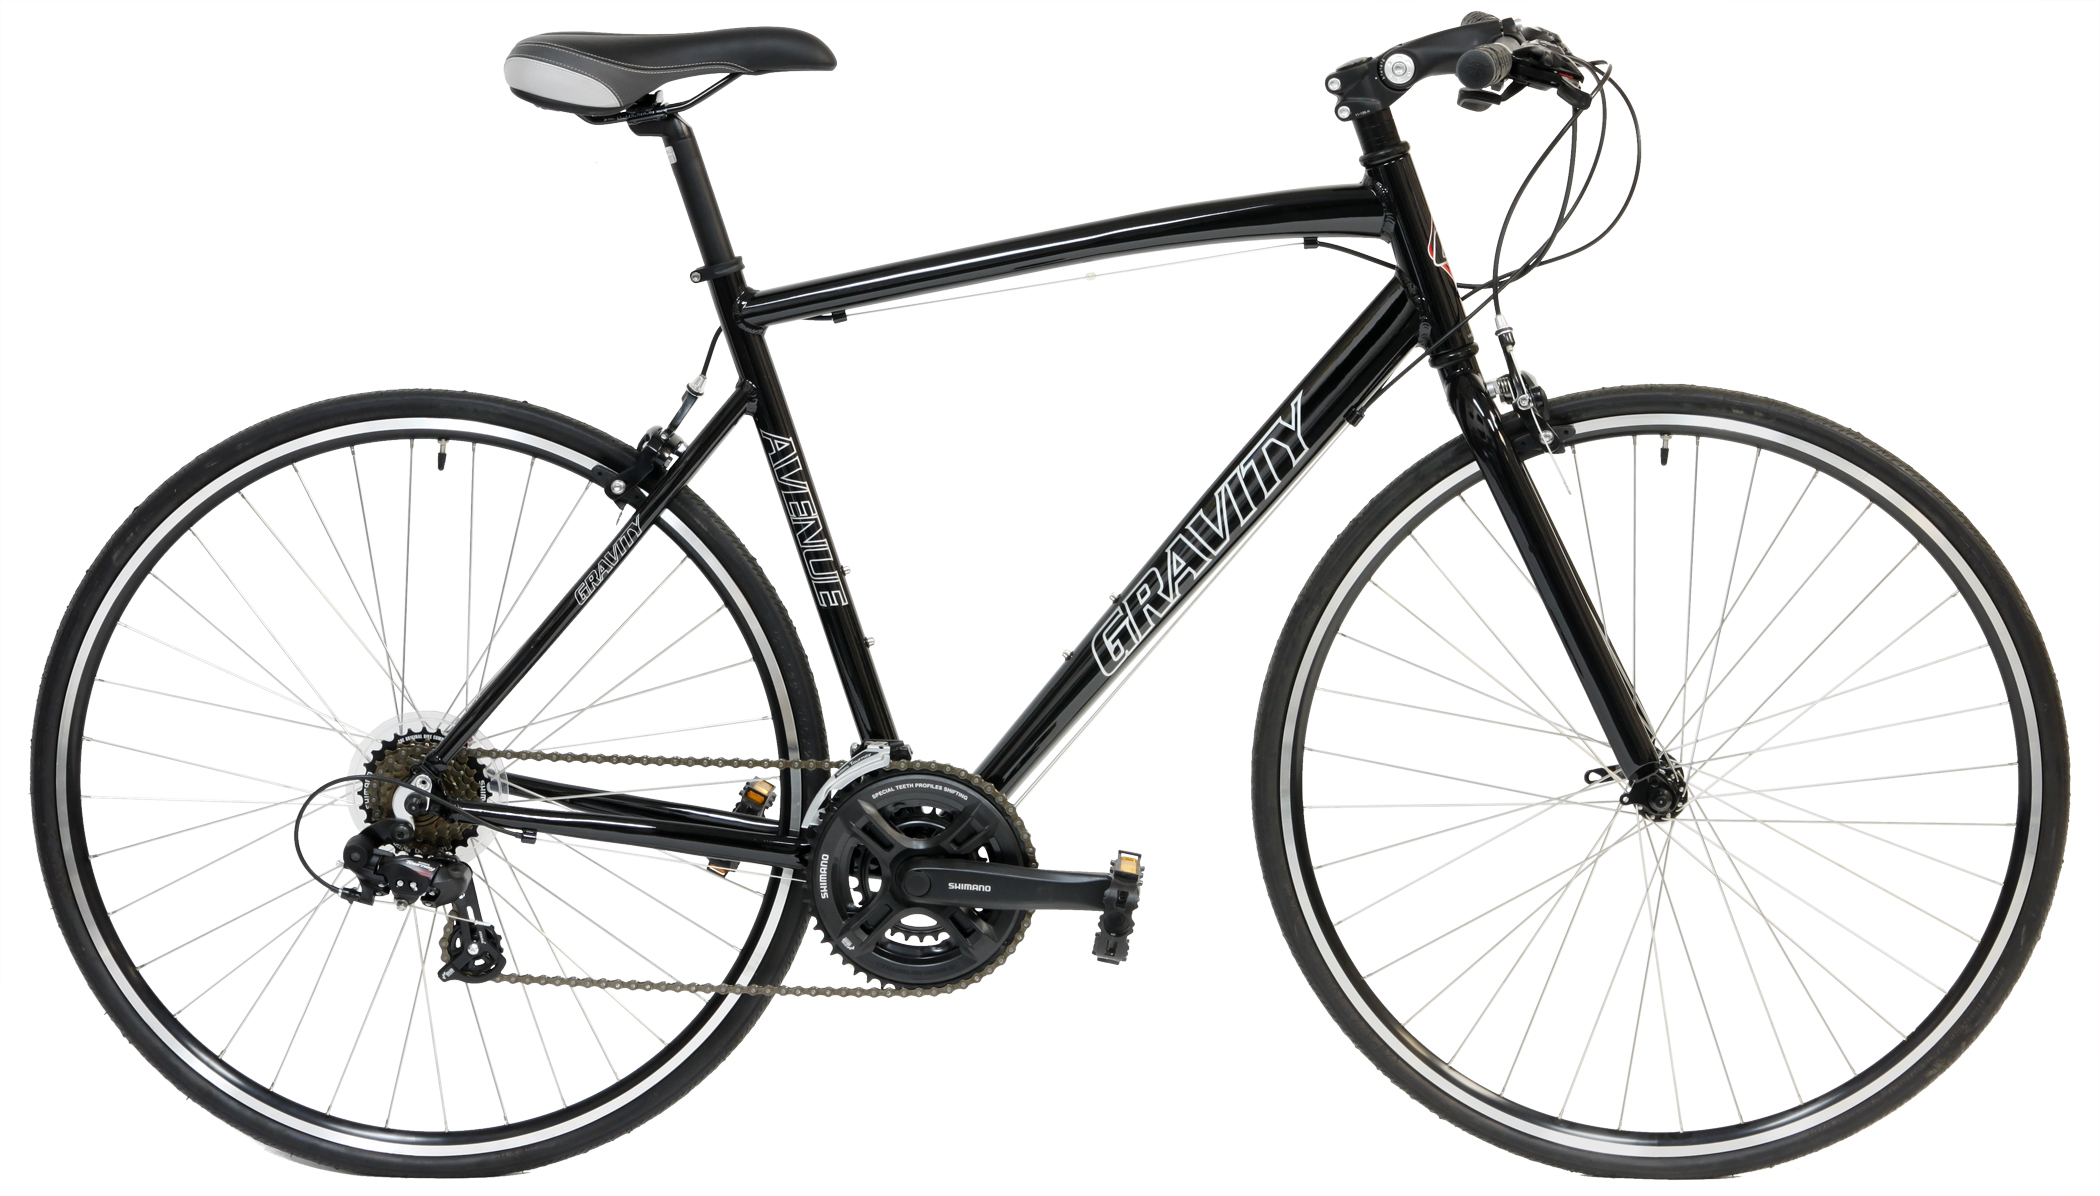 Save up to 60% off new Road Bikes